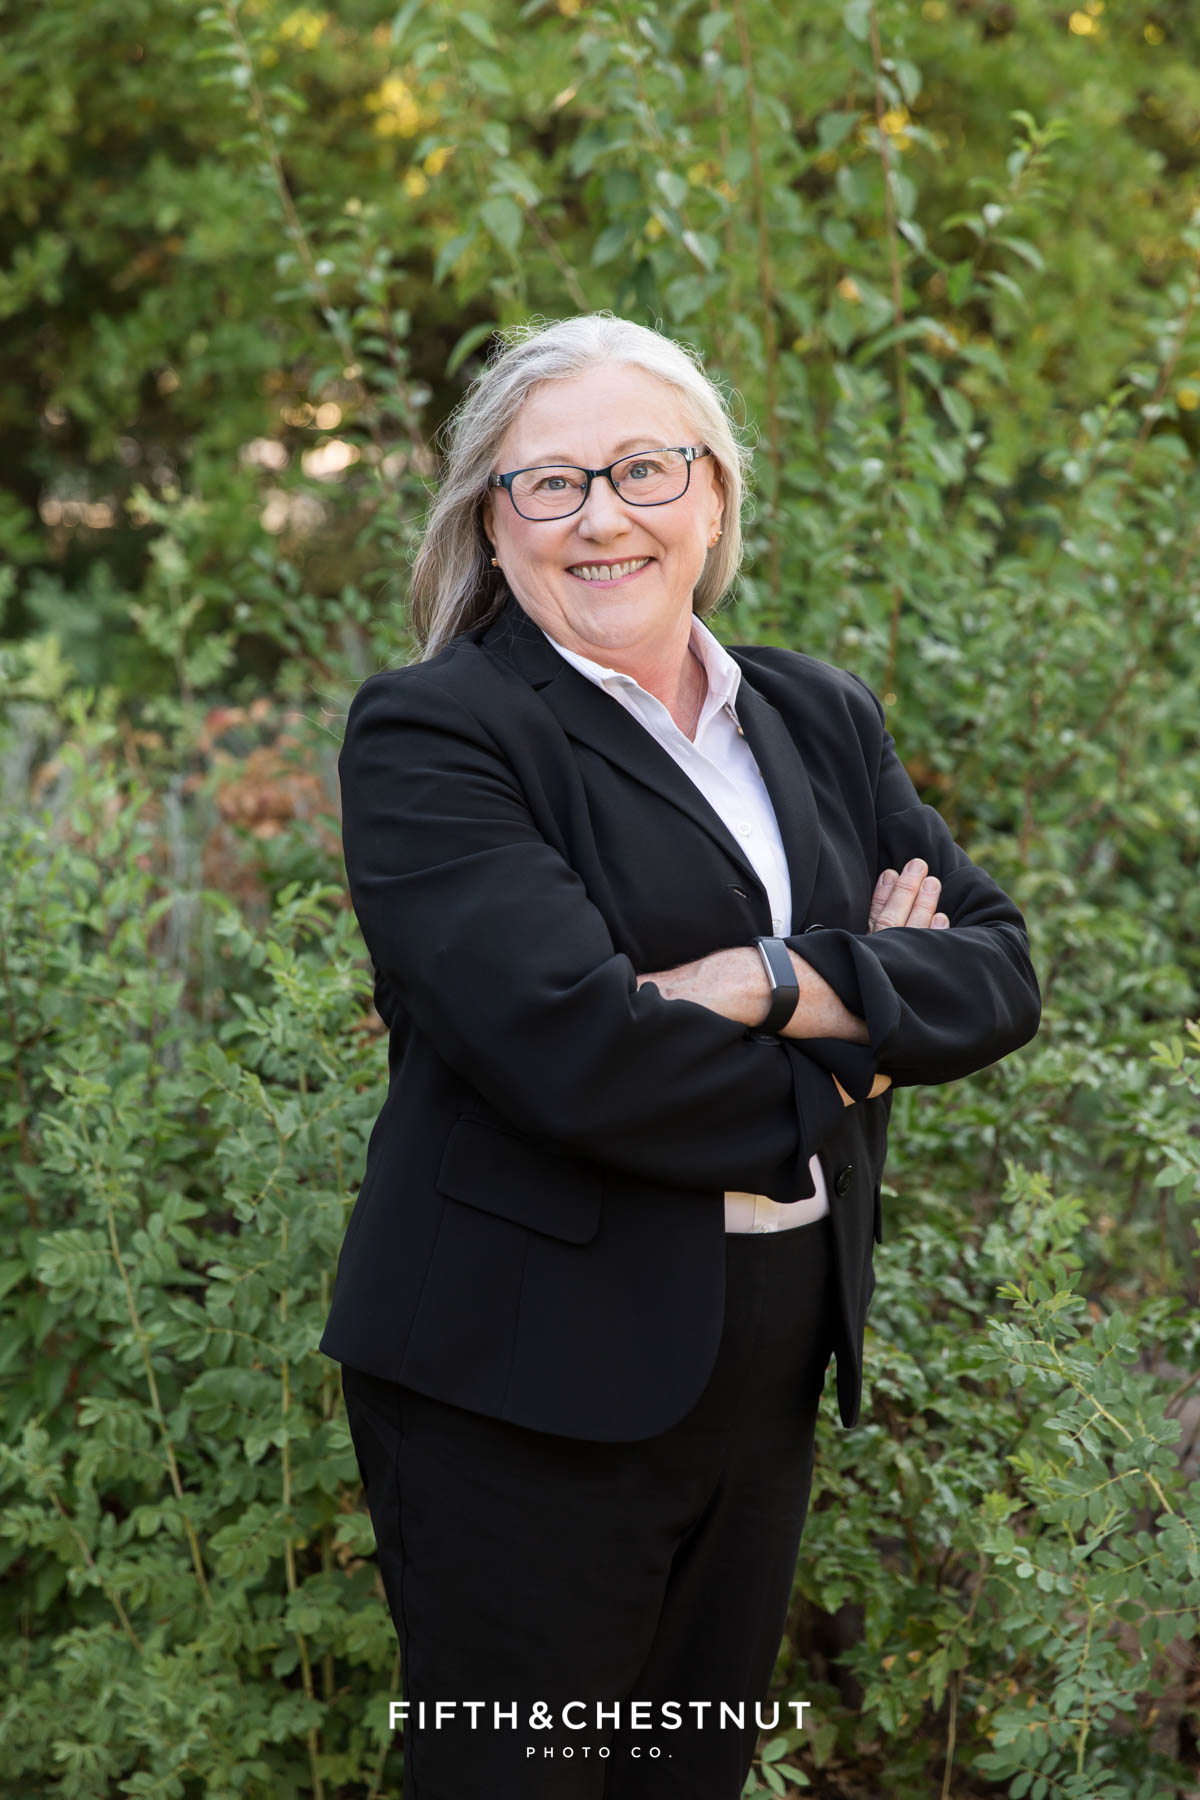 Woman crossing her arms wearing a black suit jacket for professional photos